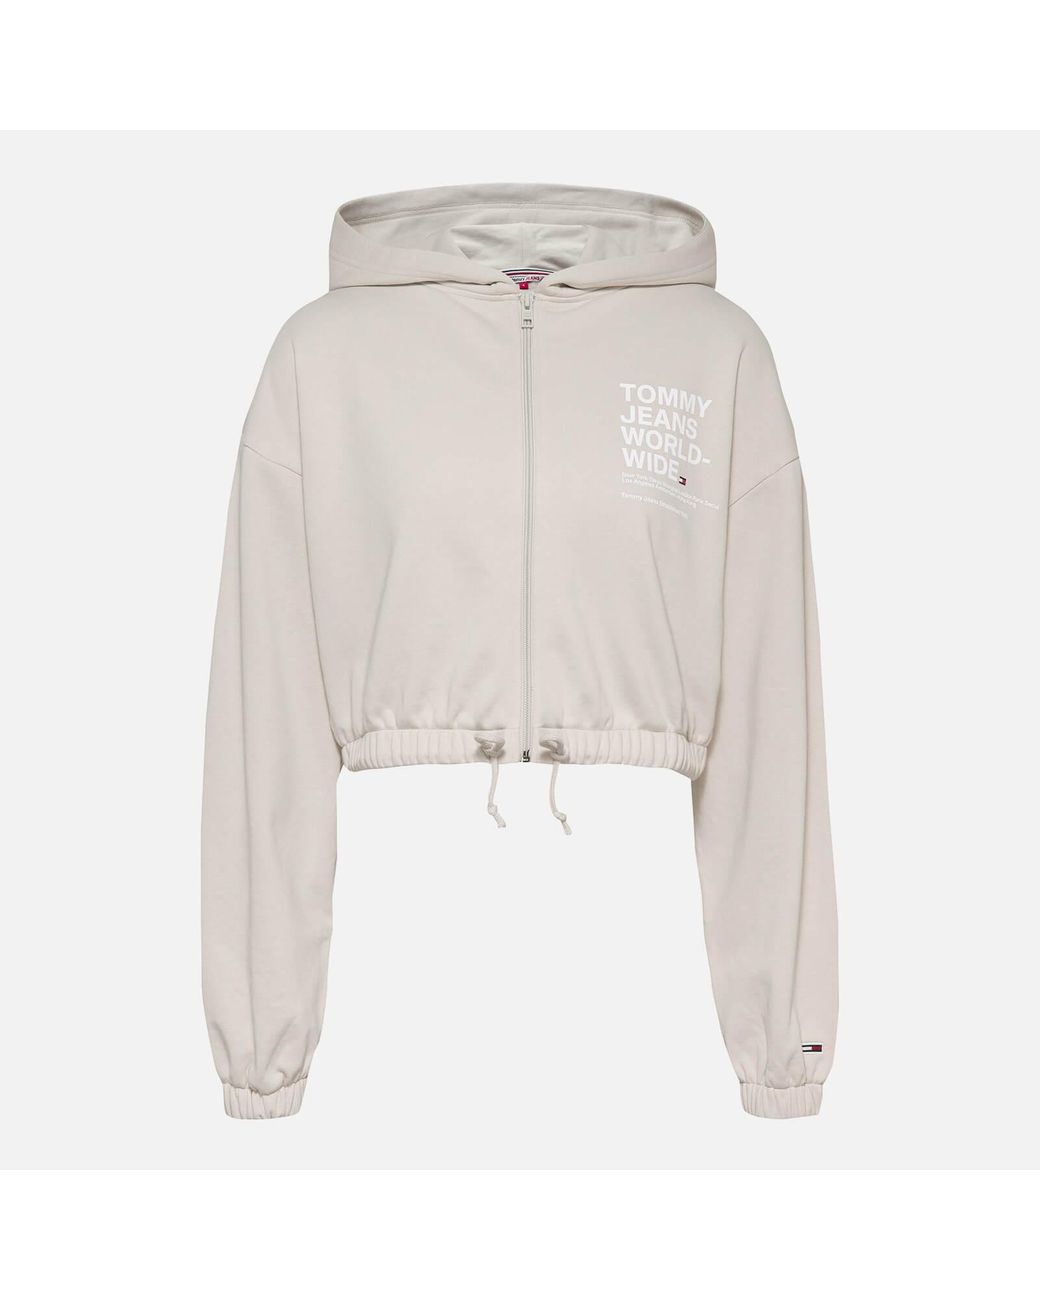 Tommy Hilfiger Cotton-blend Cropped Hoodie in White | Lyst UK